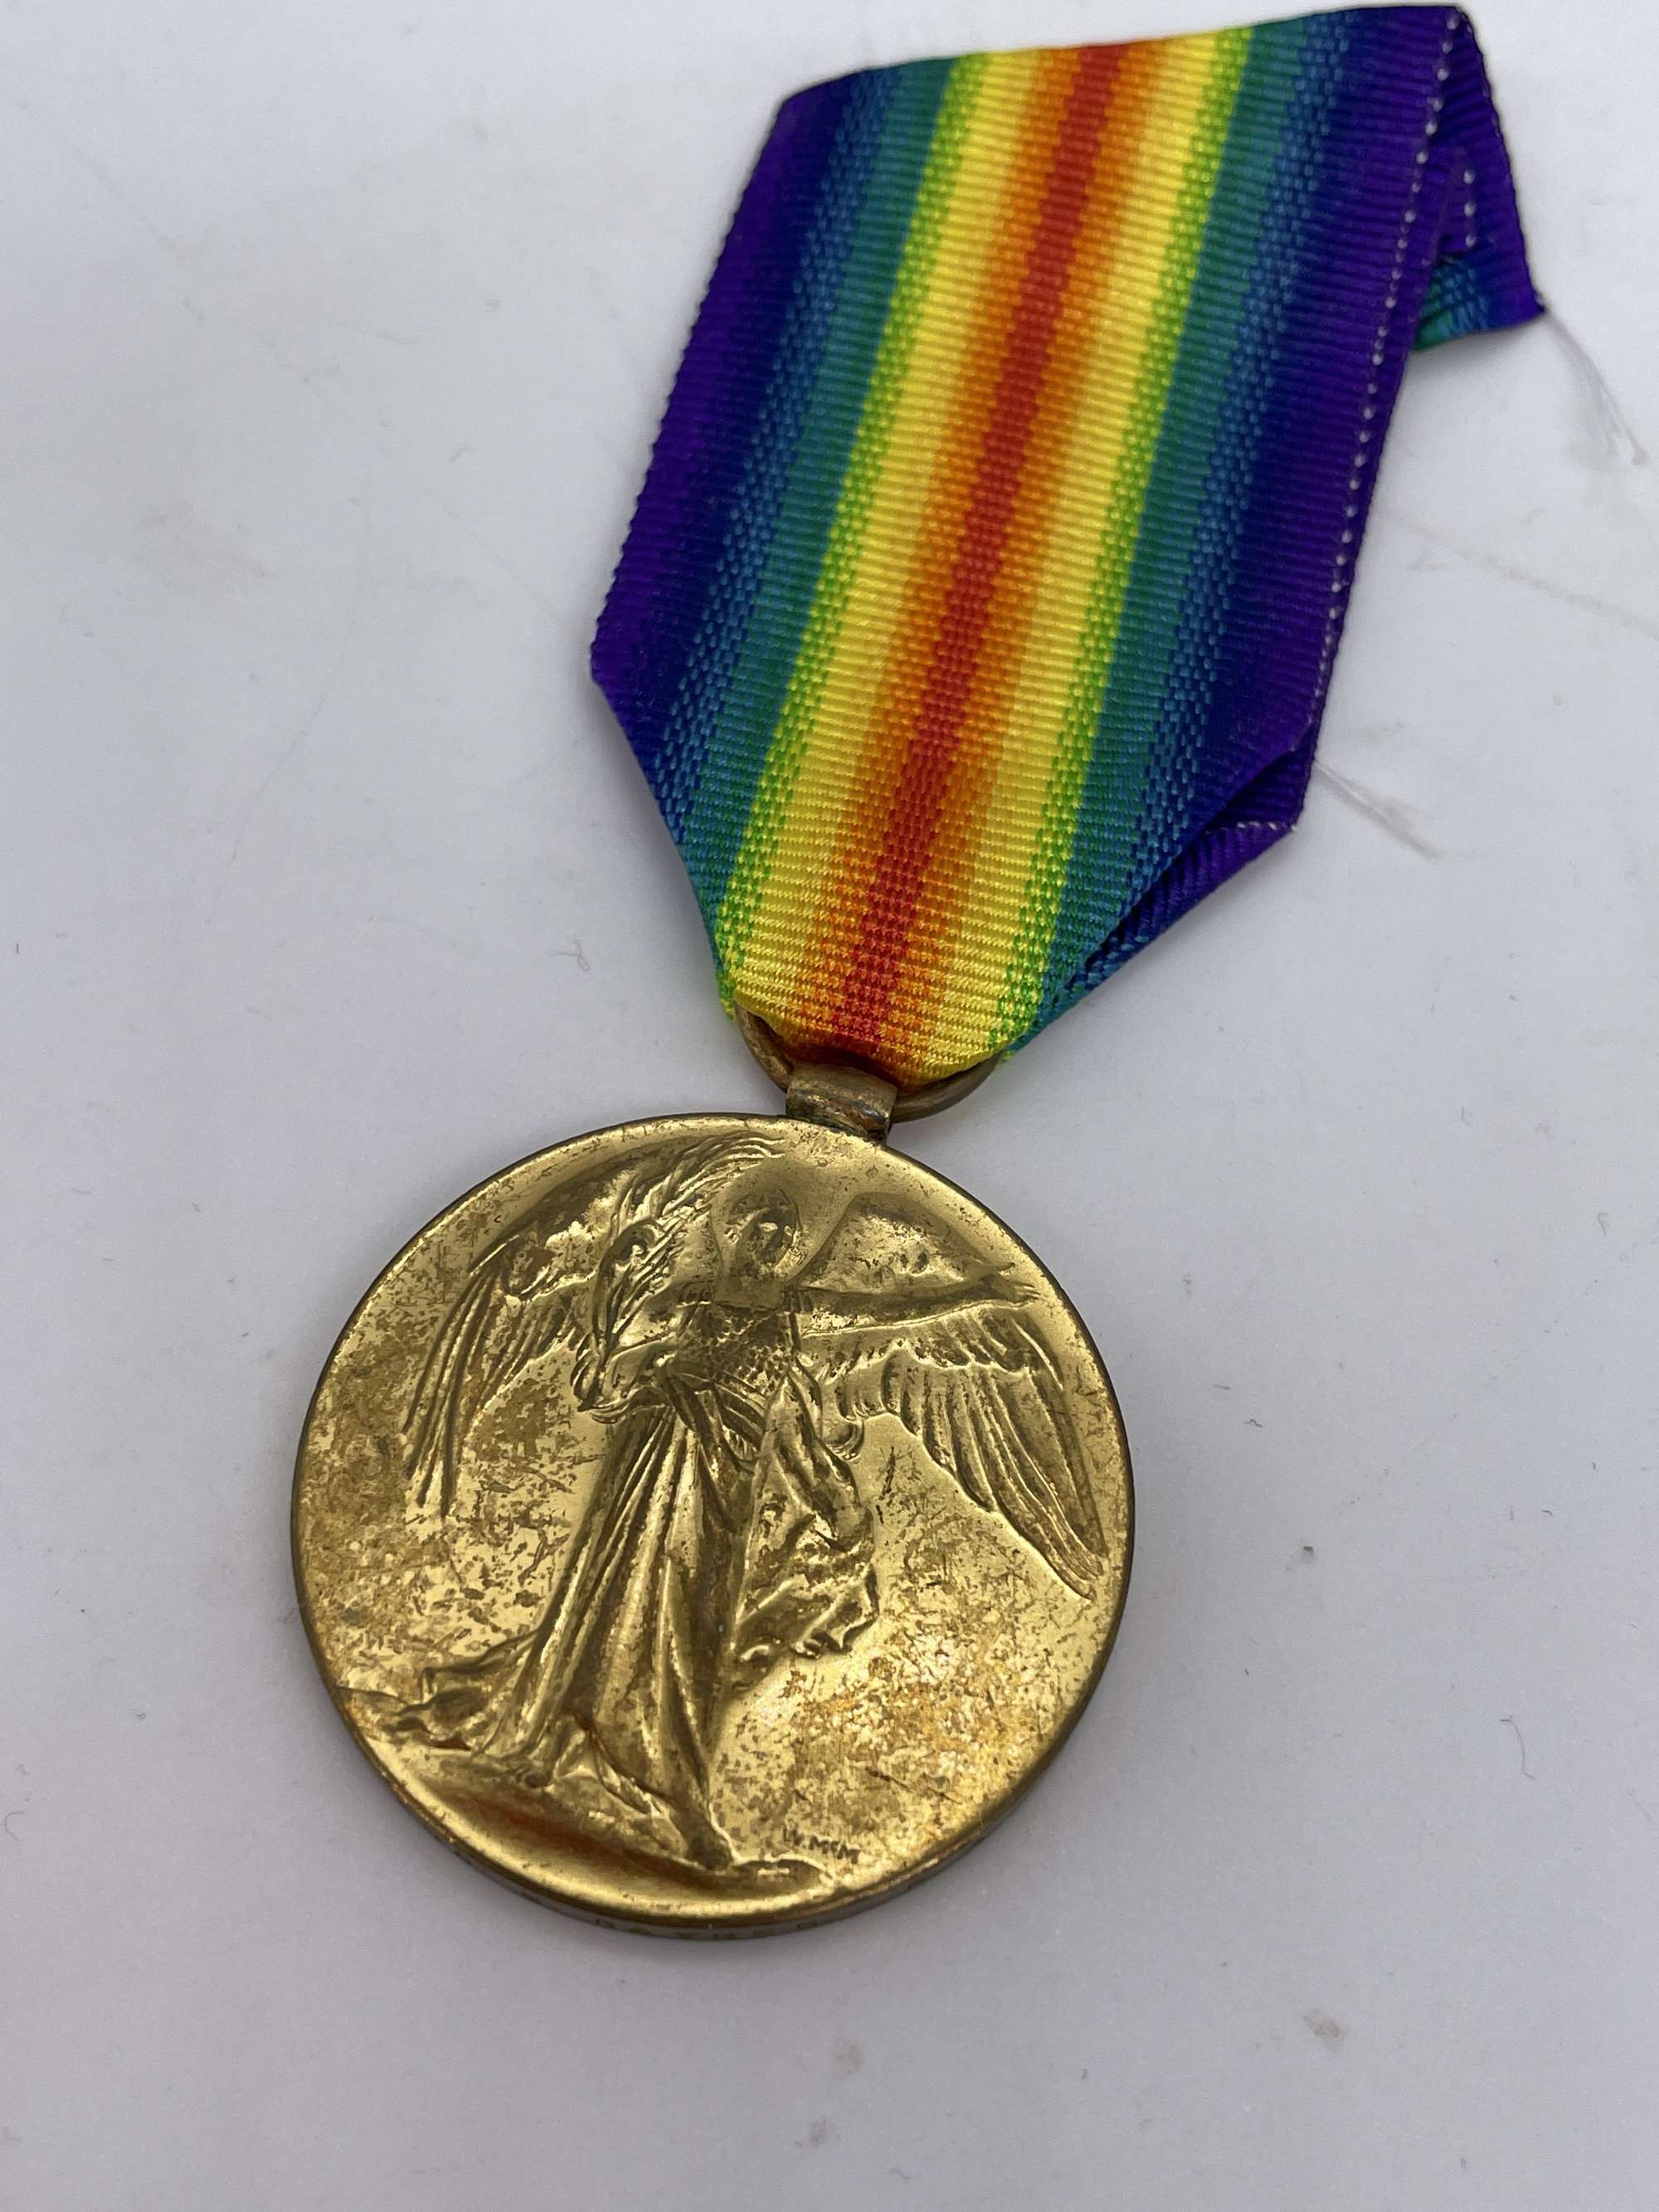 World War One Victory Medal, Pte Rayner, Royal Artillery, Killed in Action/Casualty